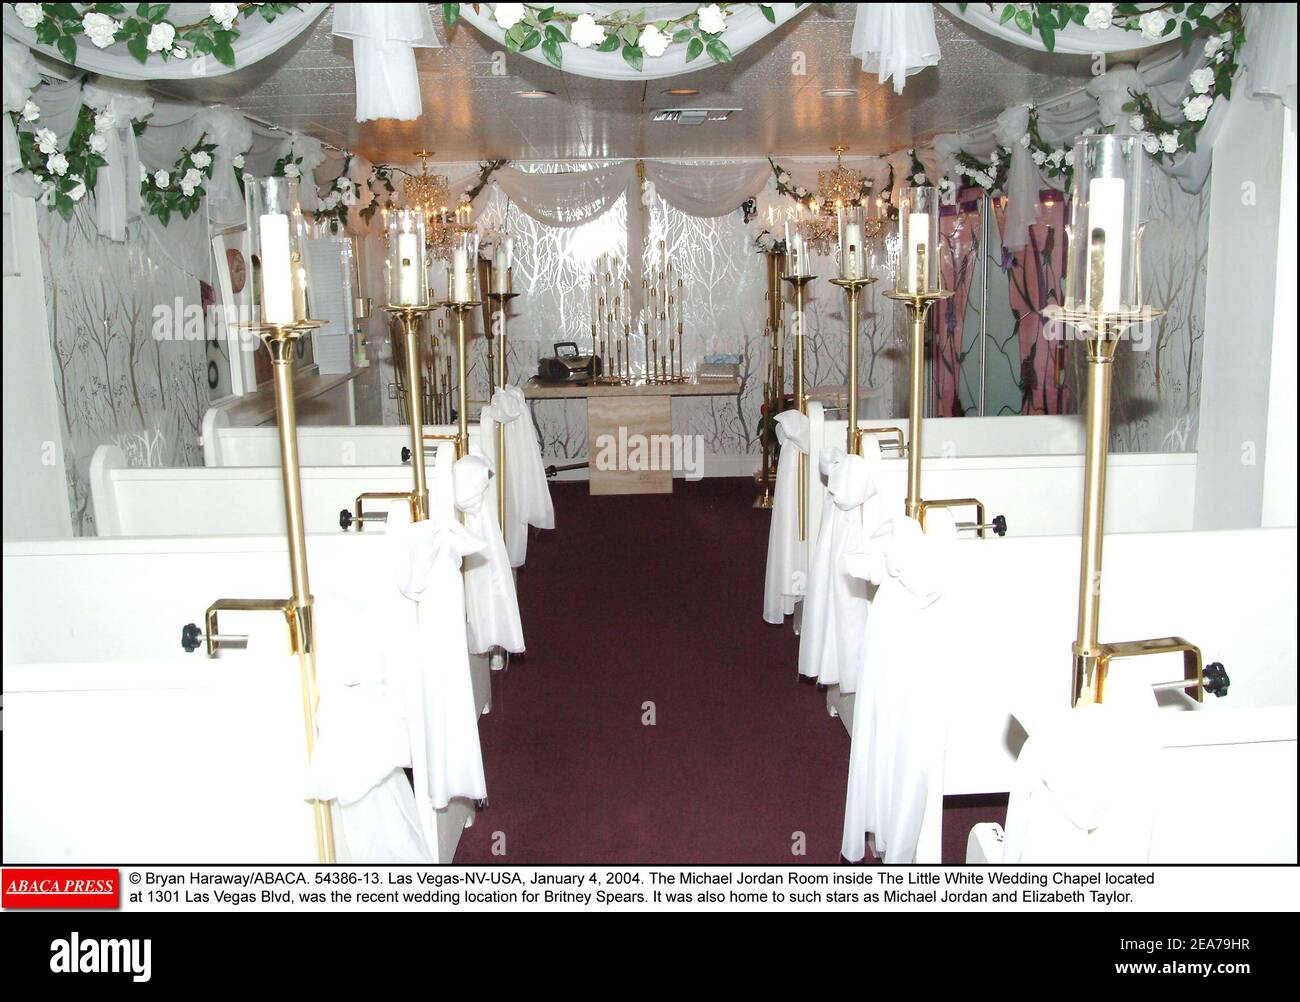 © Bryan Haraway/ABACA. 54386-13. Las Vegas-NV-USA, January 4, 2004. The Michael Jordan Room inside The Little White Wedding Chapel located at 1301 Las Vegas Blvd, was the recent wedding location for Britney Spears. It was also home to such stars as Michael Jordan and Elizabeth Taylor. Stock Photo